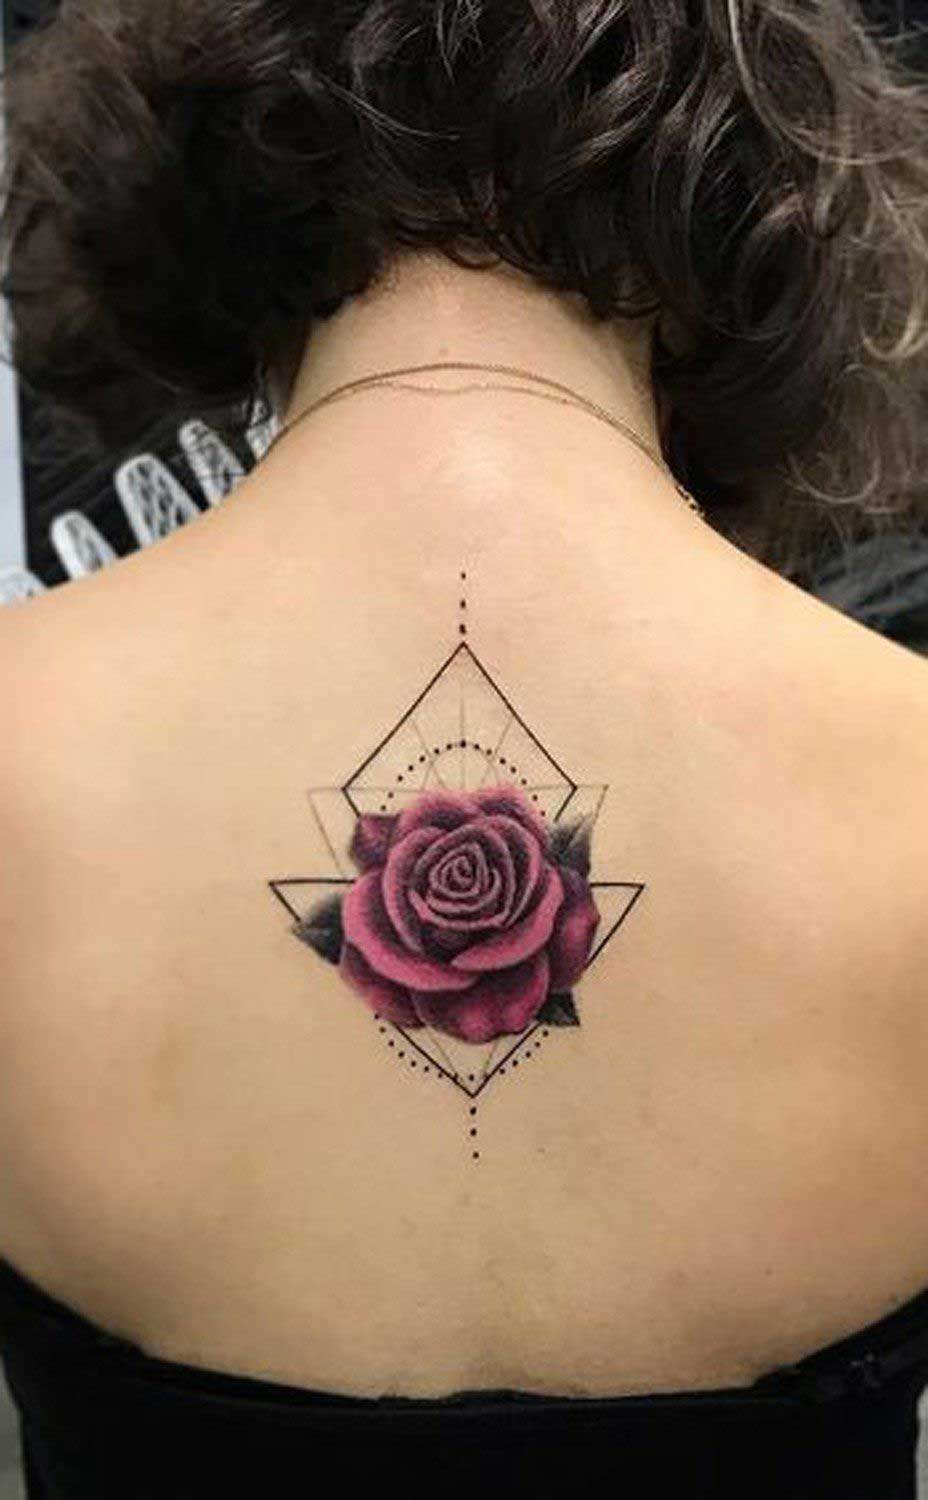 Triangle Tattoo Designs, Ideas and Meanings - All you need ...